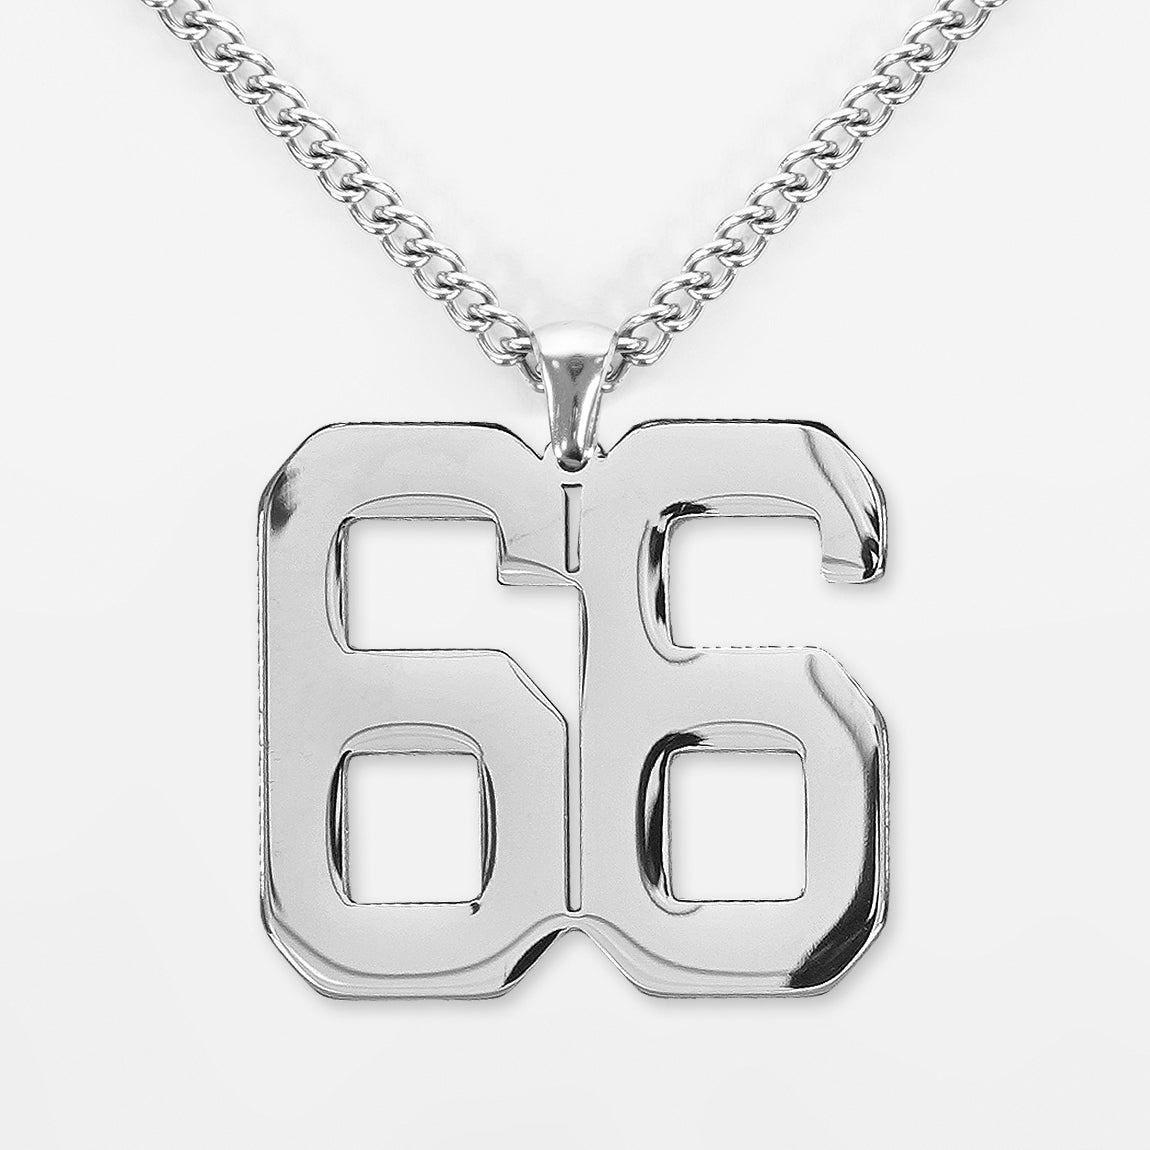 66 Number Pendant with Chain Necklace - Stainless Steel